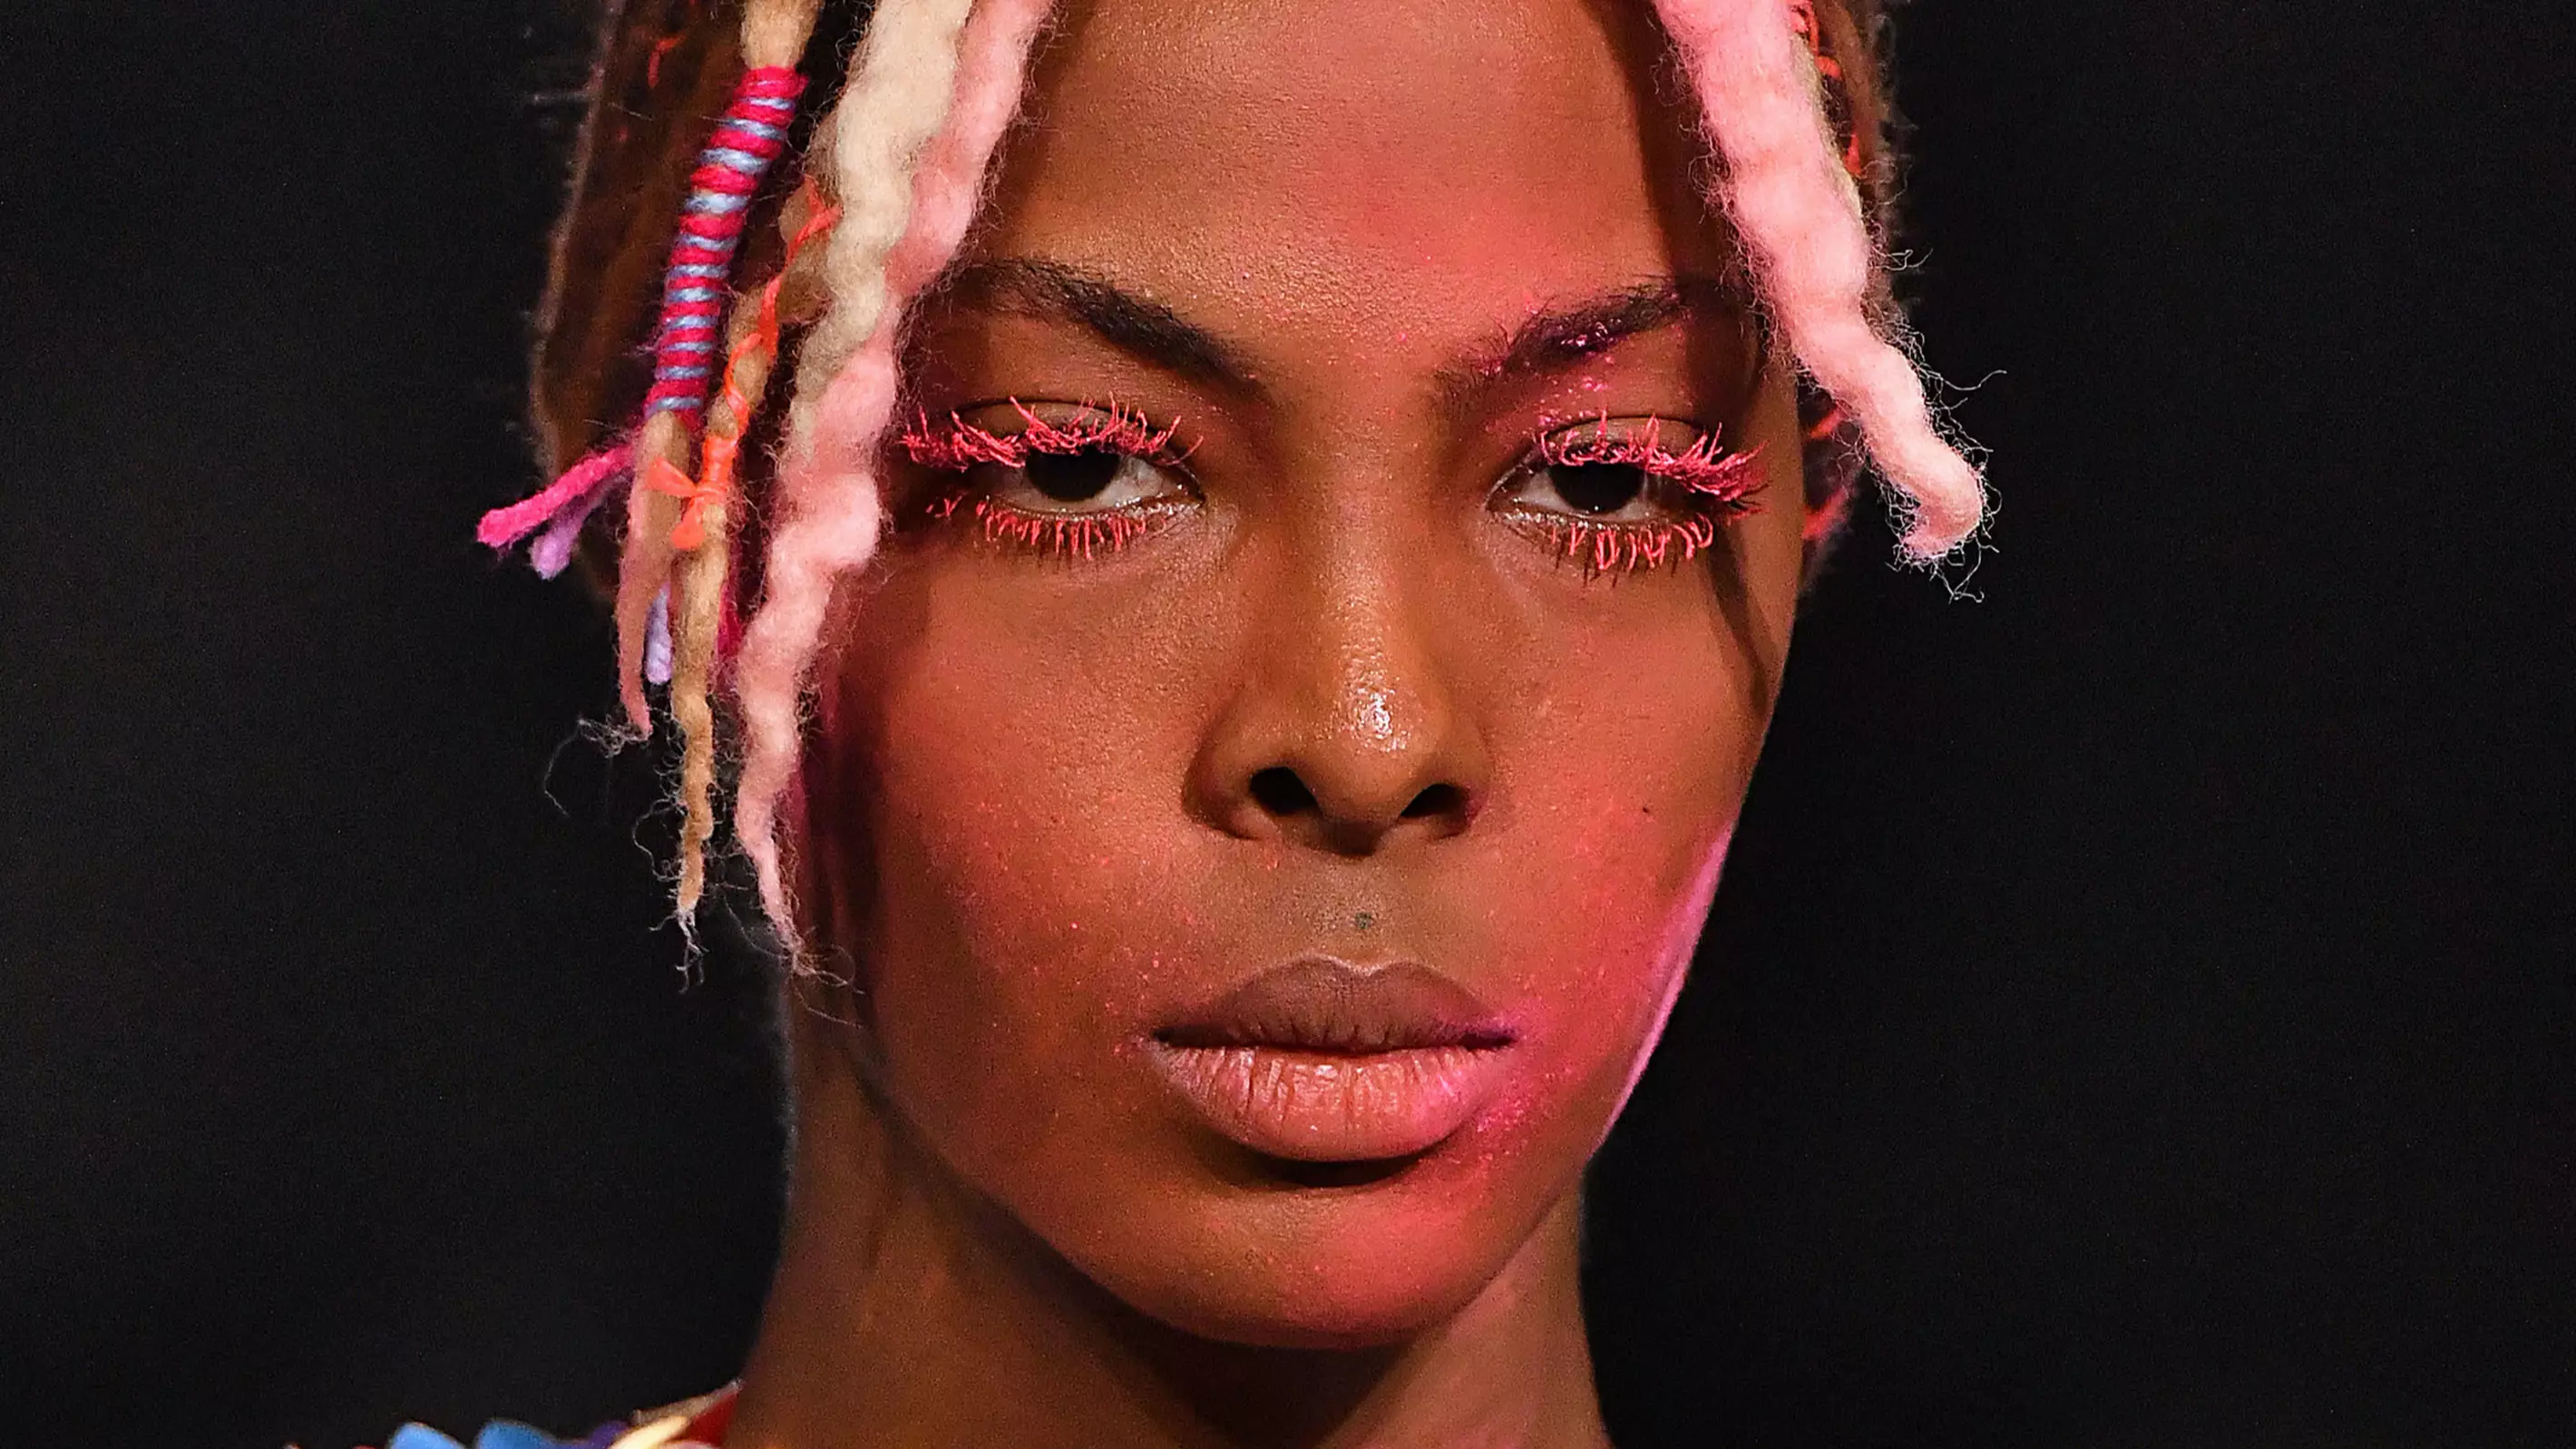 Neon Lashes Are The Next Big Beauty Trend, And We're Here For Them